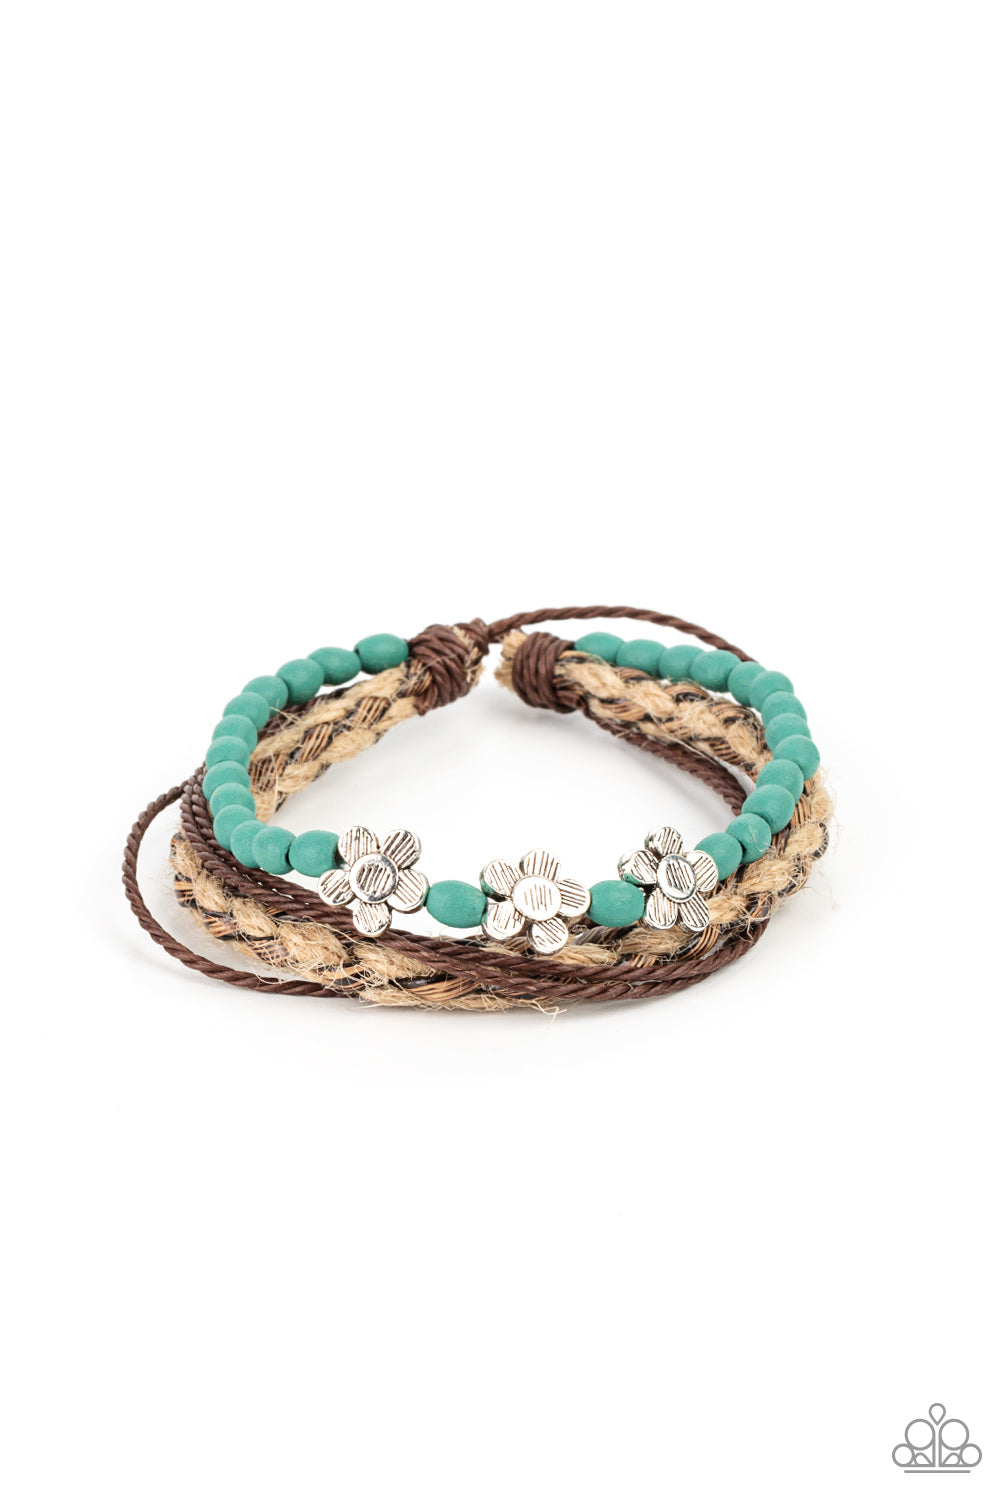 Raffia Remix Blue Bracelet - Paparazzi Accessories  Three delightful etched silver flowers stand out on a strand of turquoise wooden beads. Paired with an assortment of braided twine and cording, the set wraps around the wrist for an earthy remix. Features an adjustable sliding knot closure.  All Paparazzi Accessories are lead free and nickel free!  Sold as one individual bracelet.